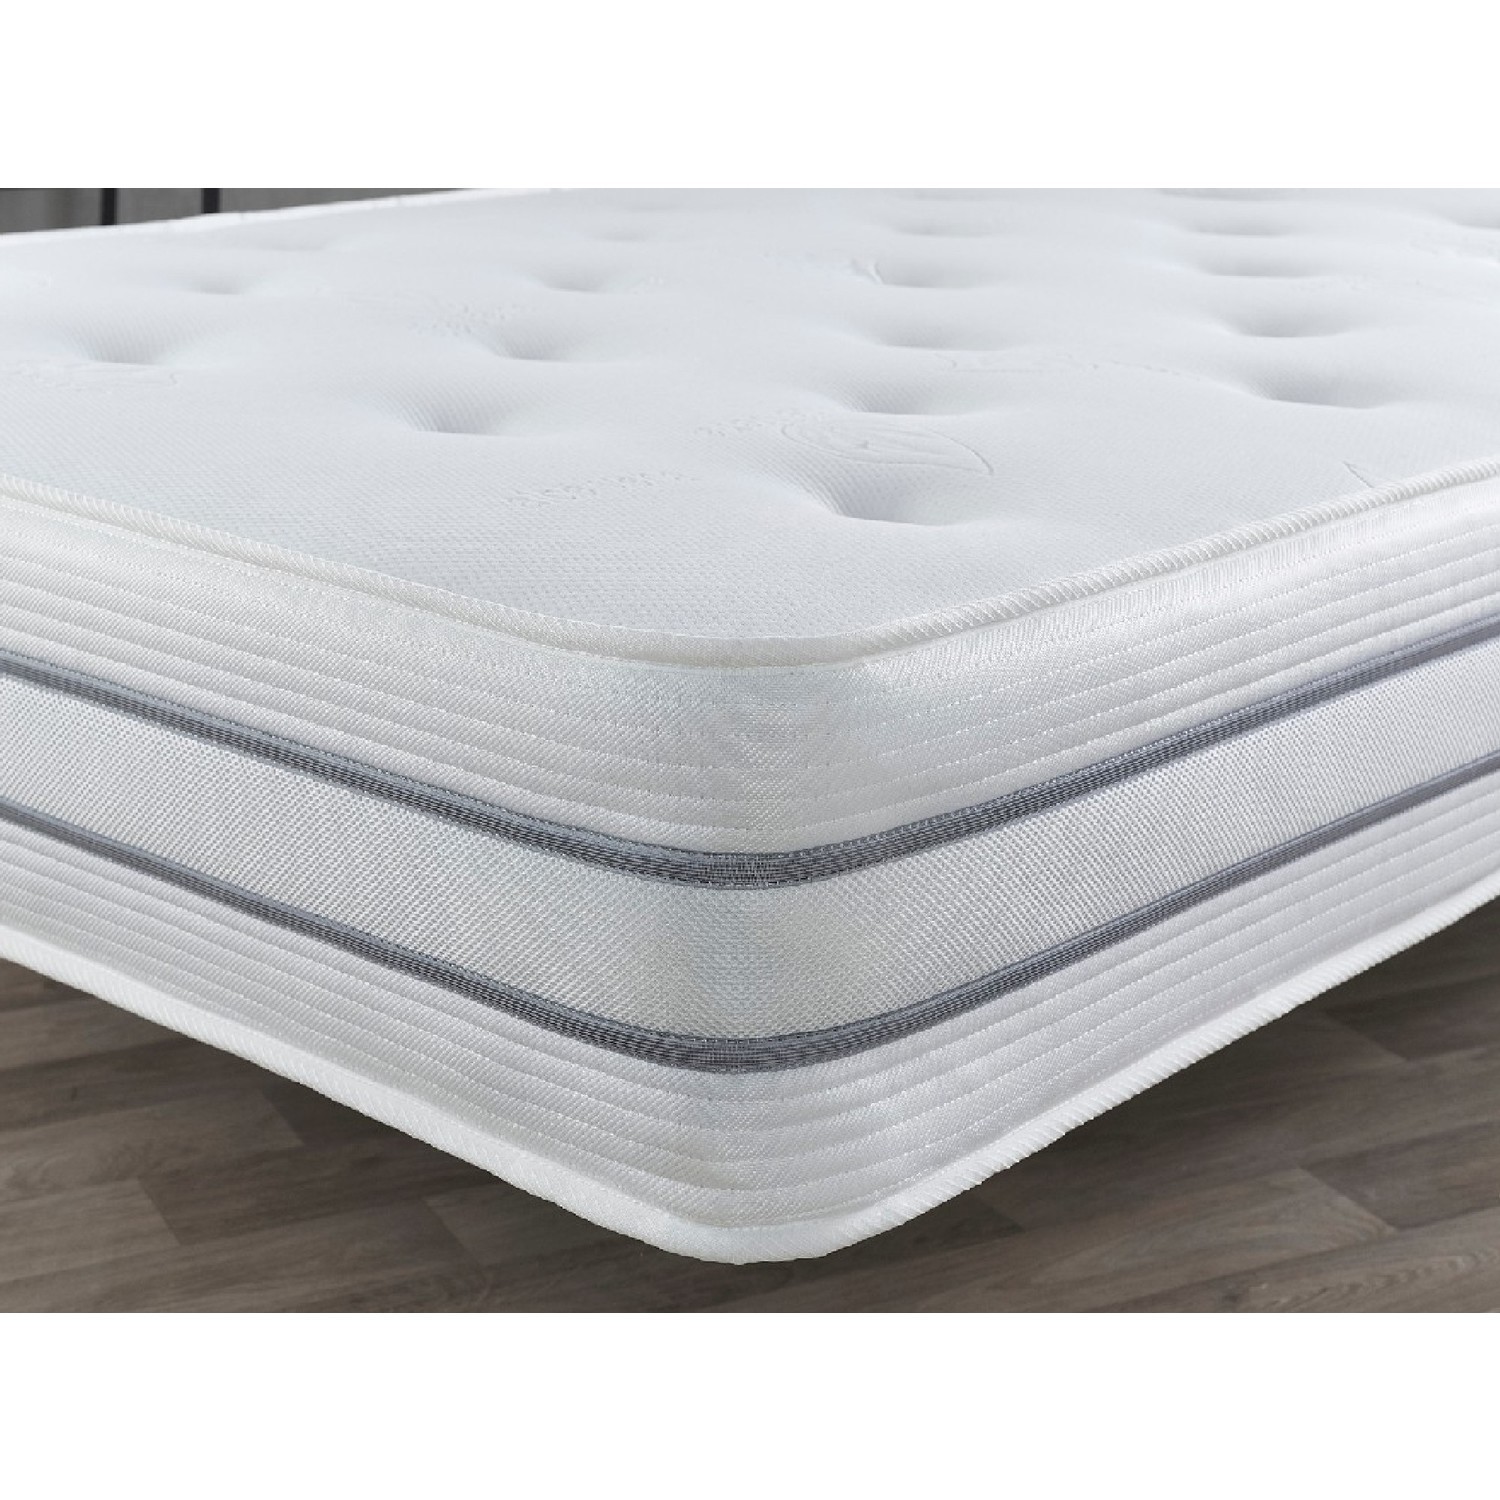 Photo of Small double 1000 pocket sprung cooling natural fibre rolled mattress - aspire